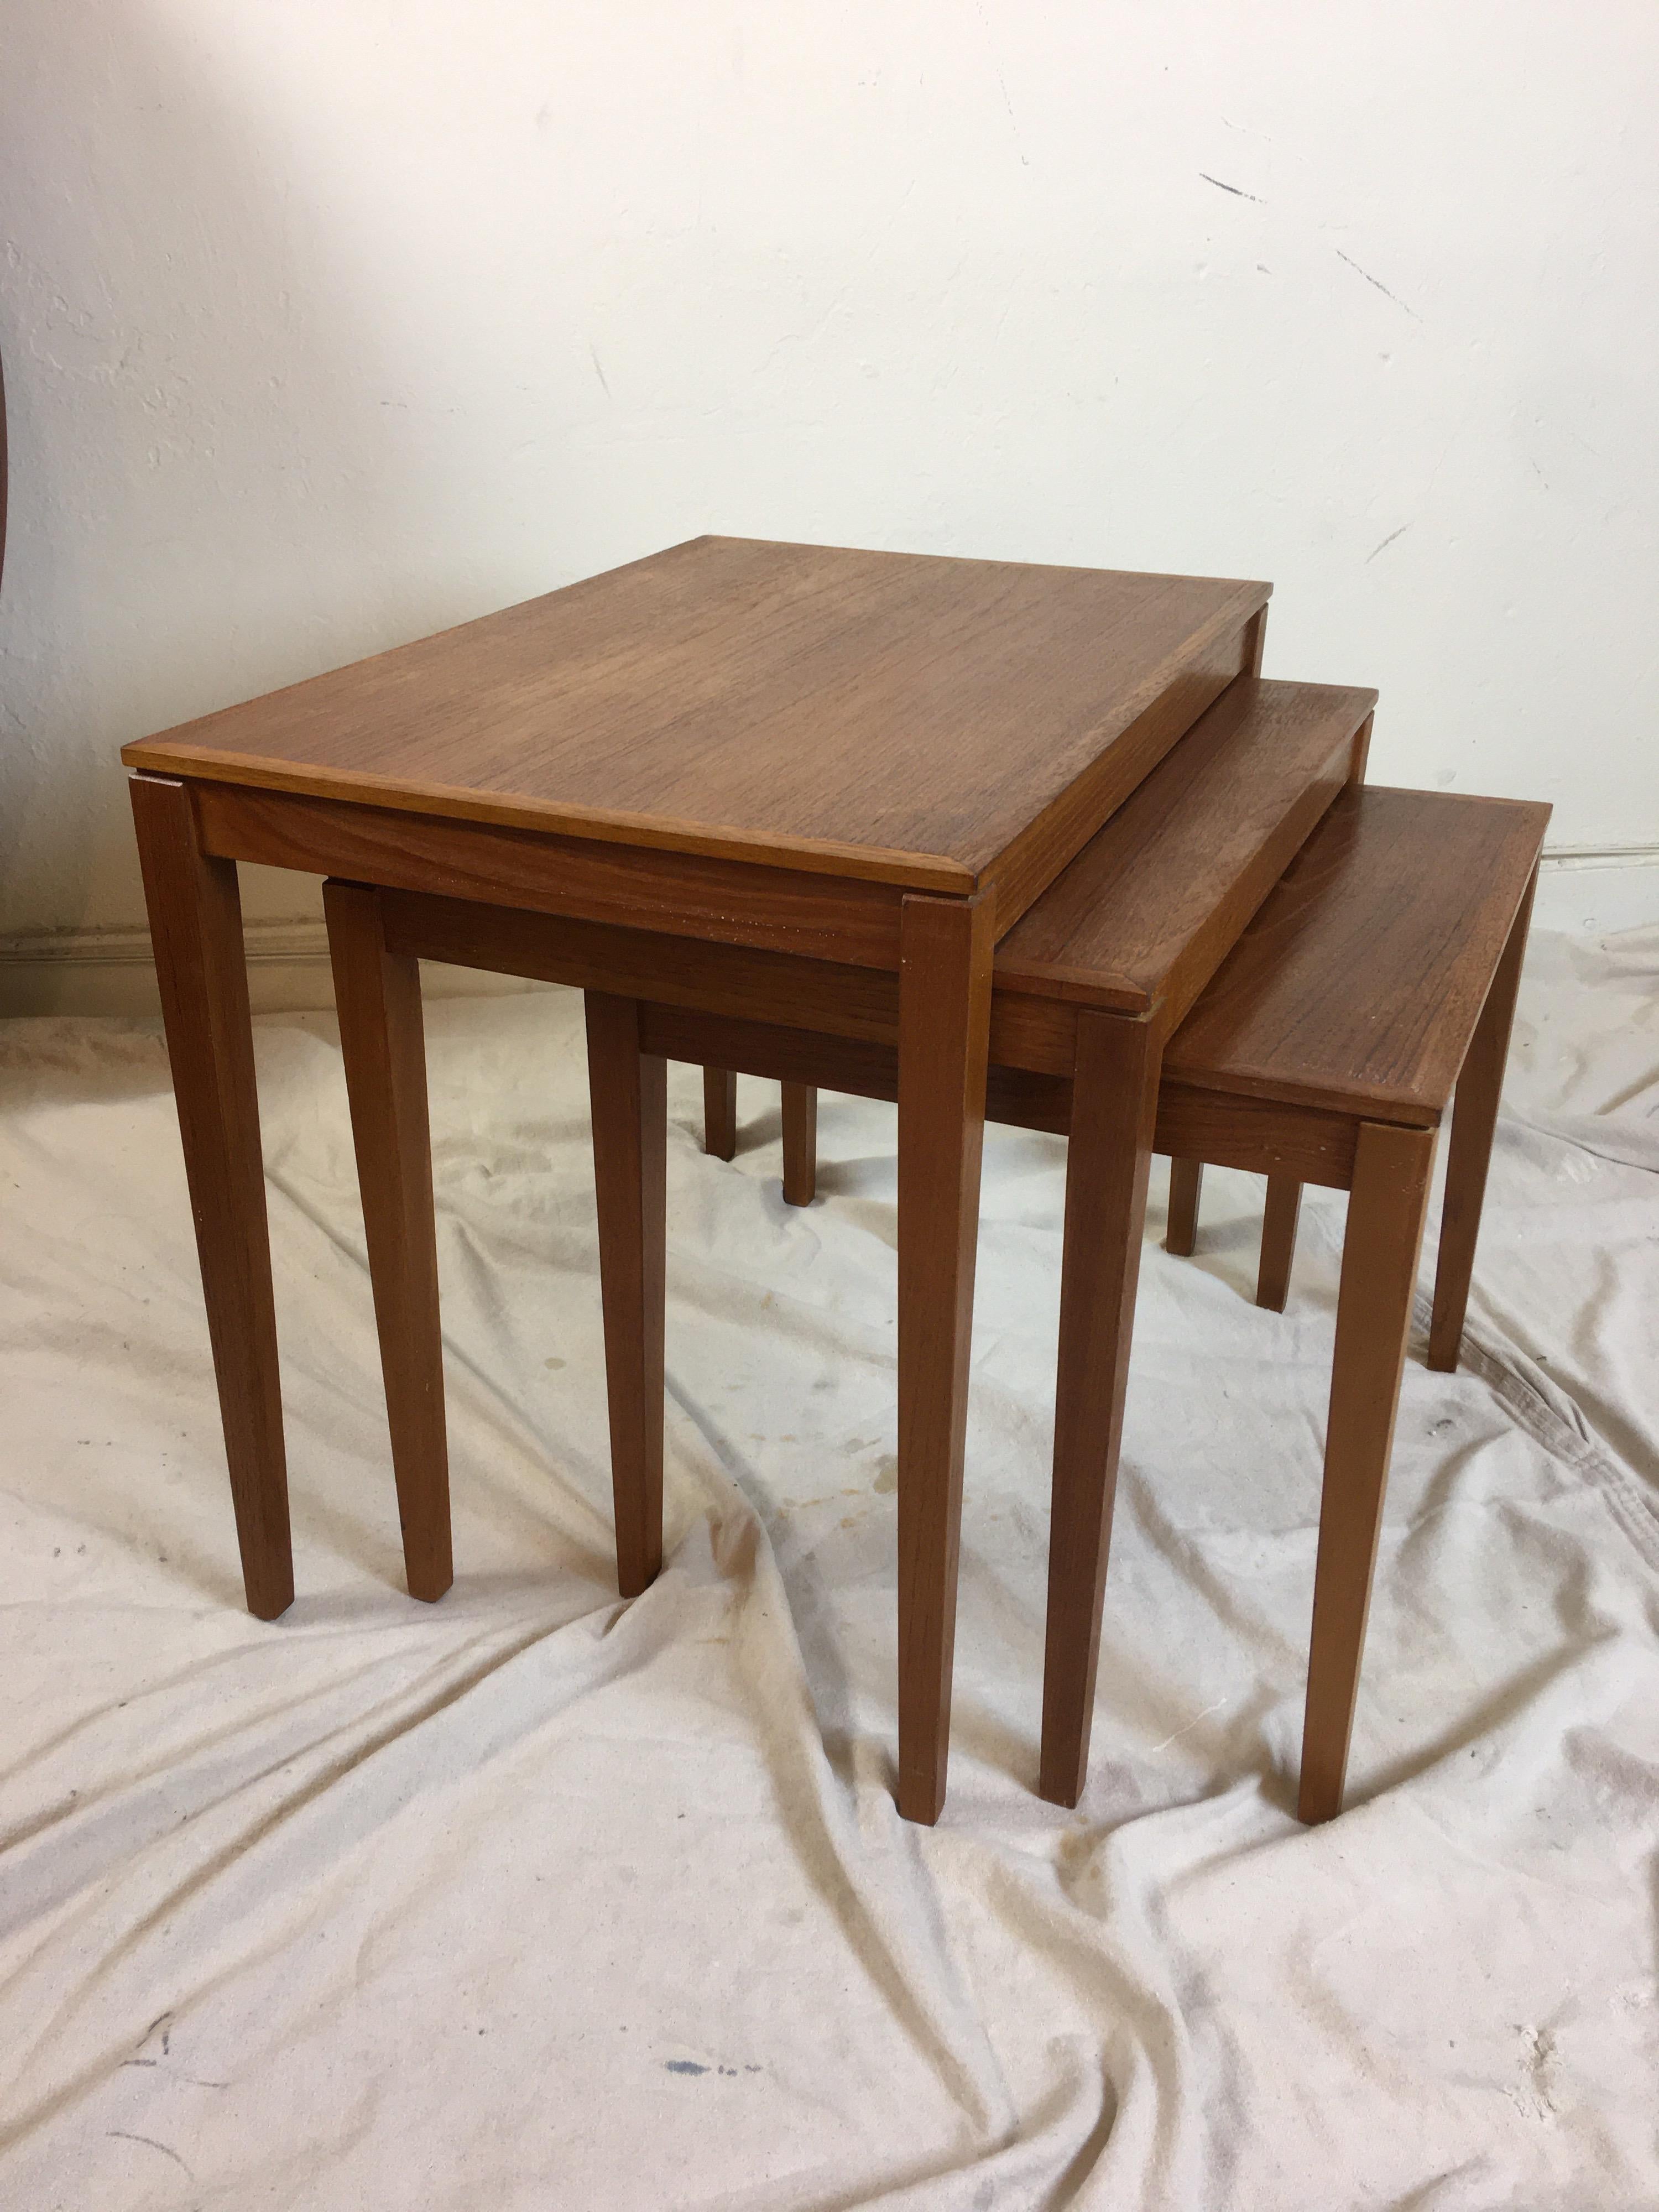 Set of 3 Bent Silberg's Mobler teak nesting tables. Nice grain and color. All three tables are the same depth 15.75 so they close up as basically one table. Very useful set! Largest table is 23.5 wide, middle table is 20.5 wide and small table is